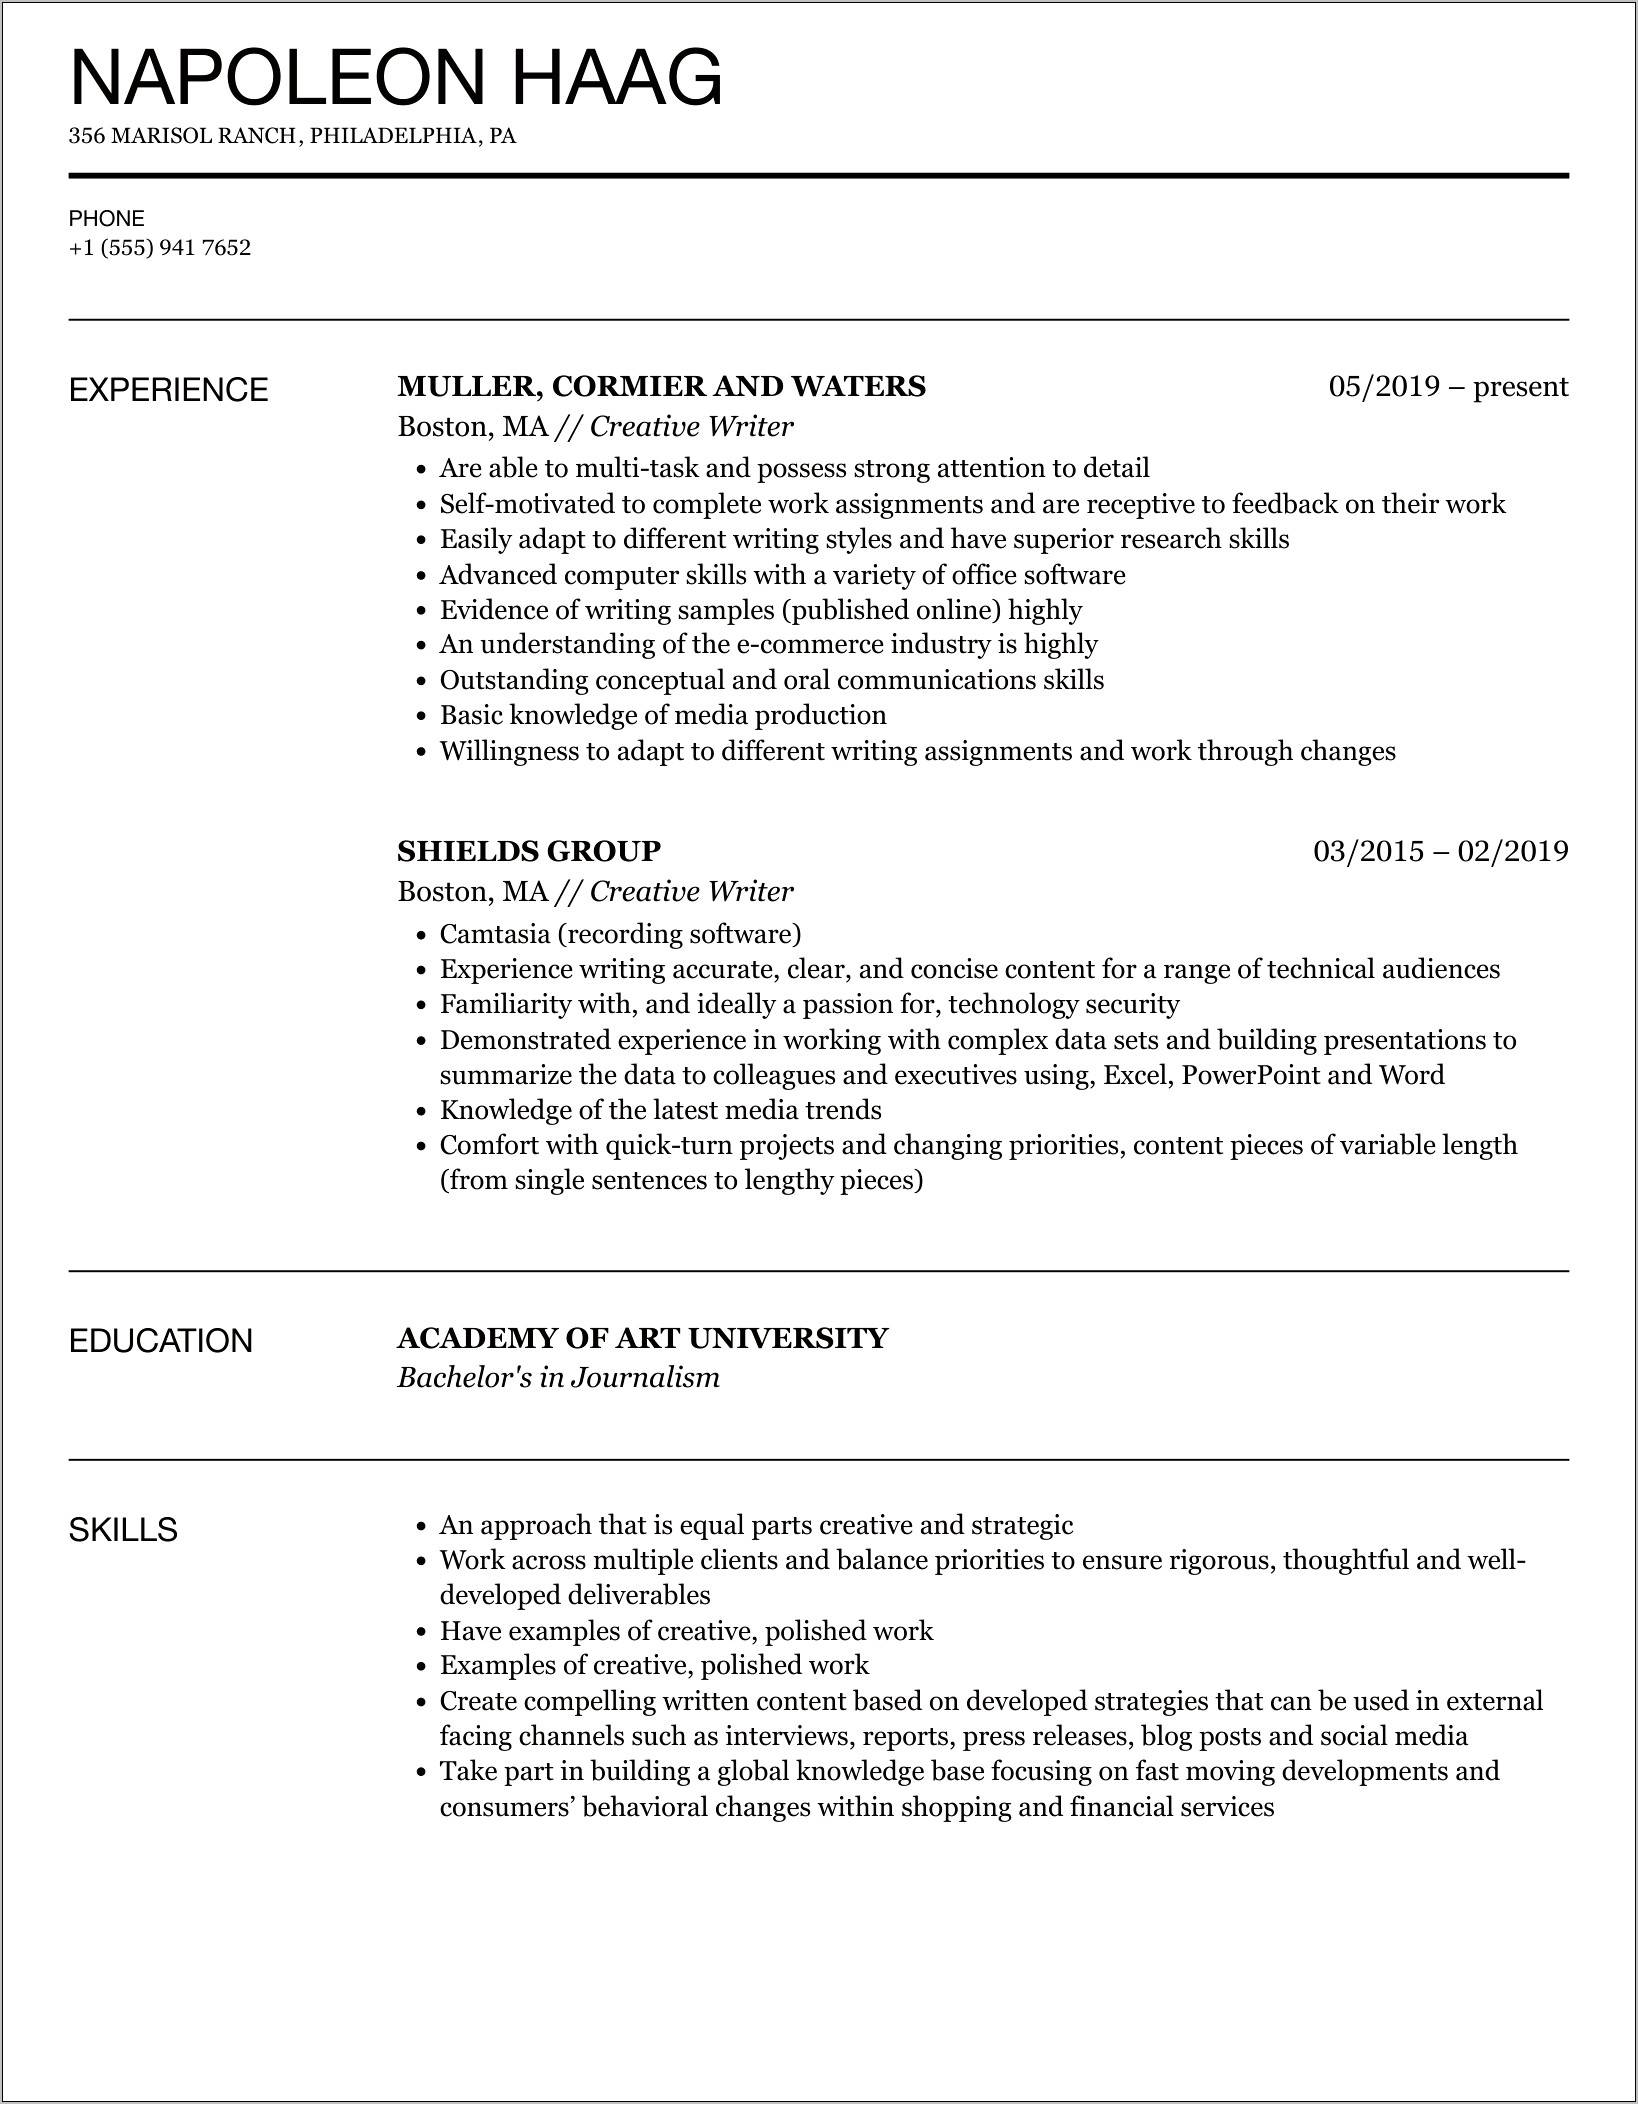 Resume Objective Sample For Writers